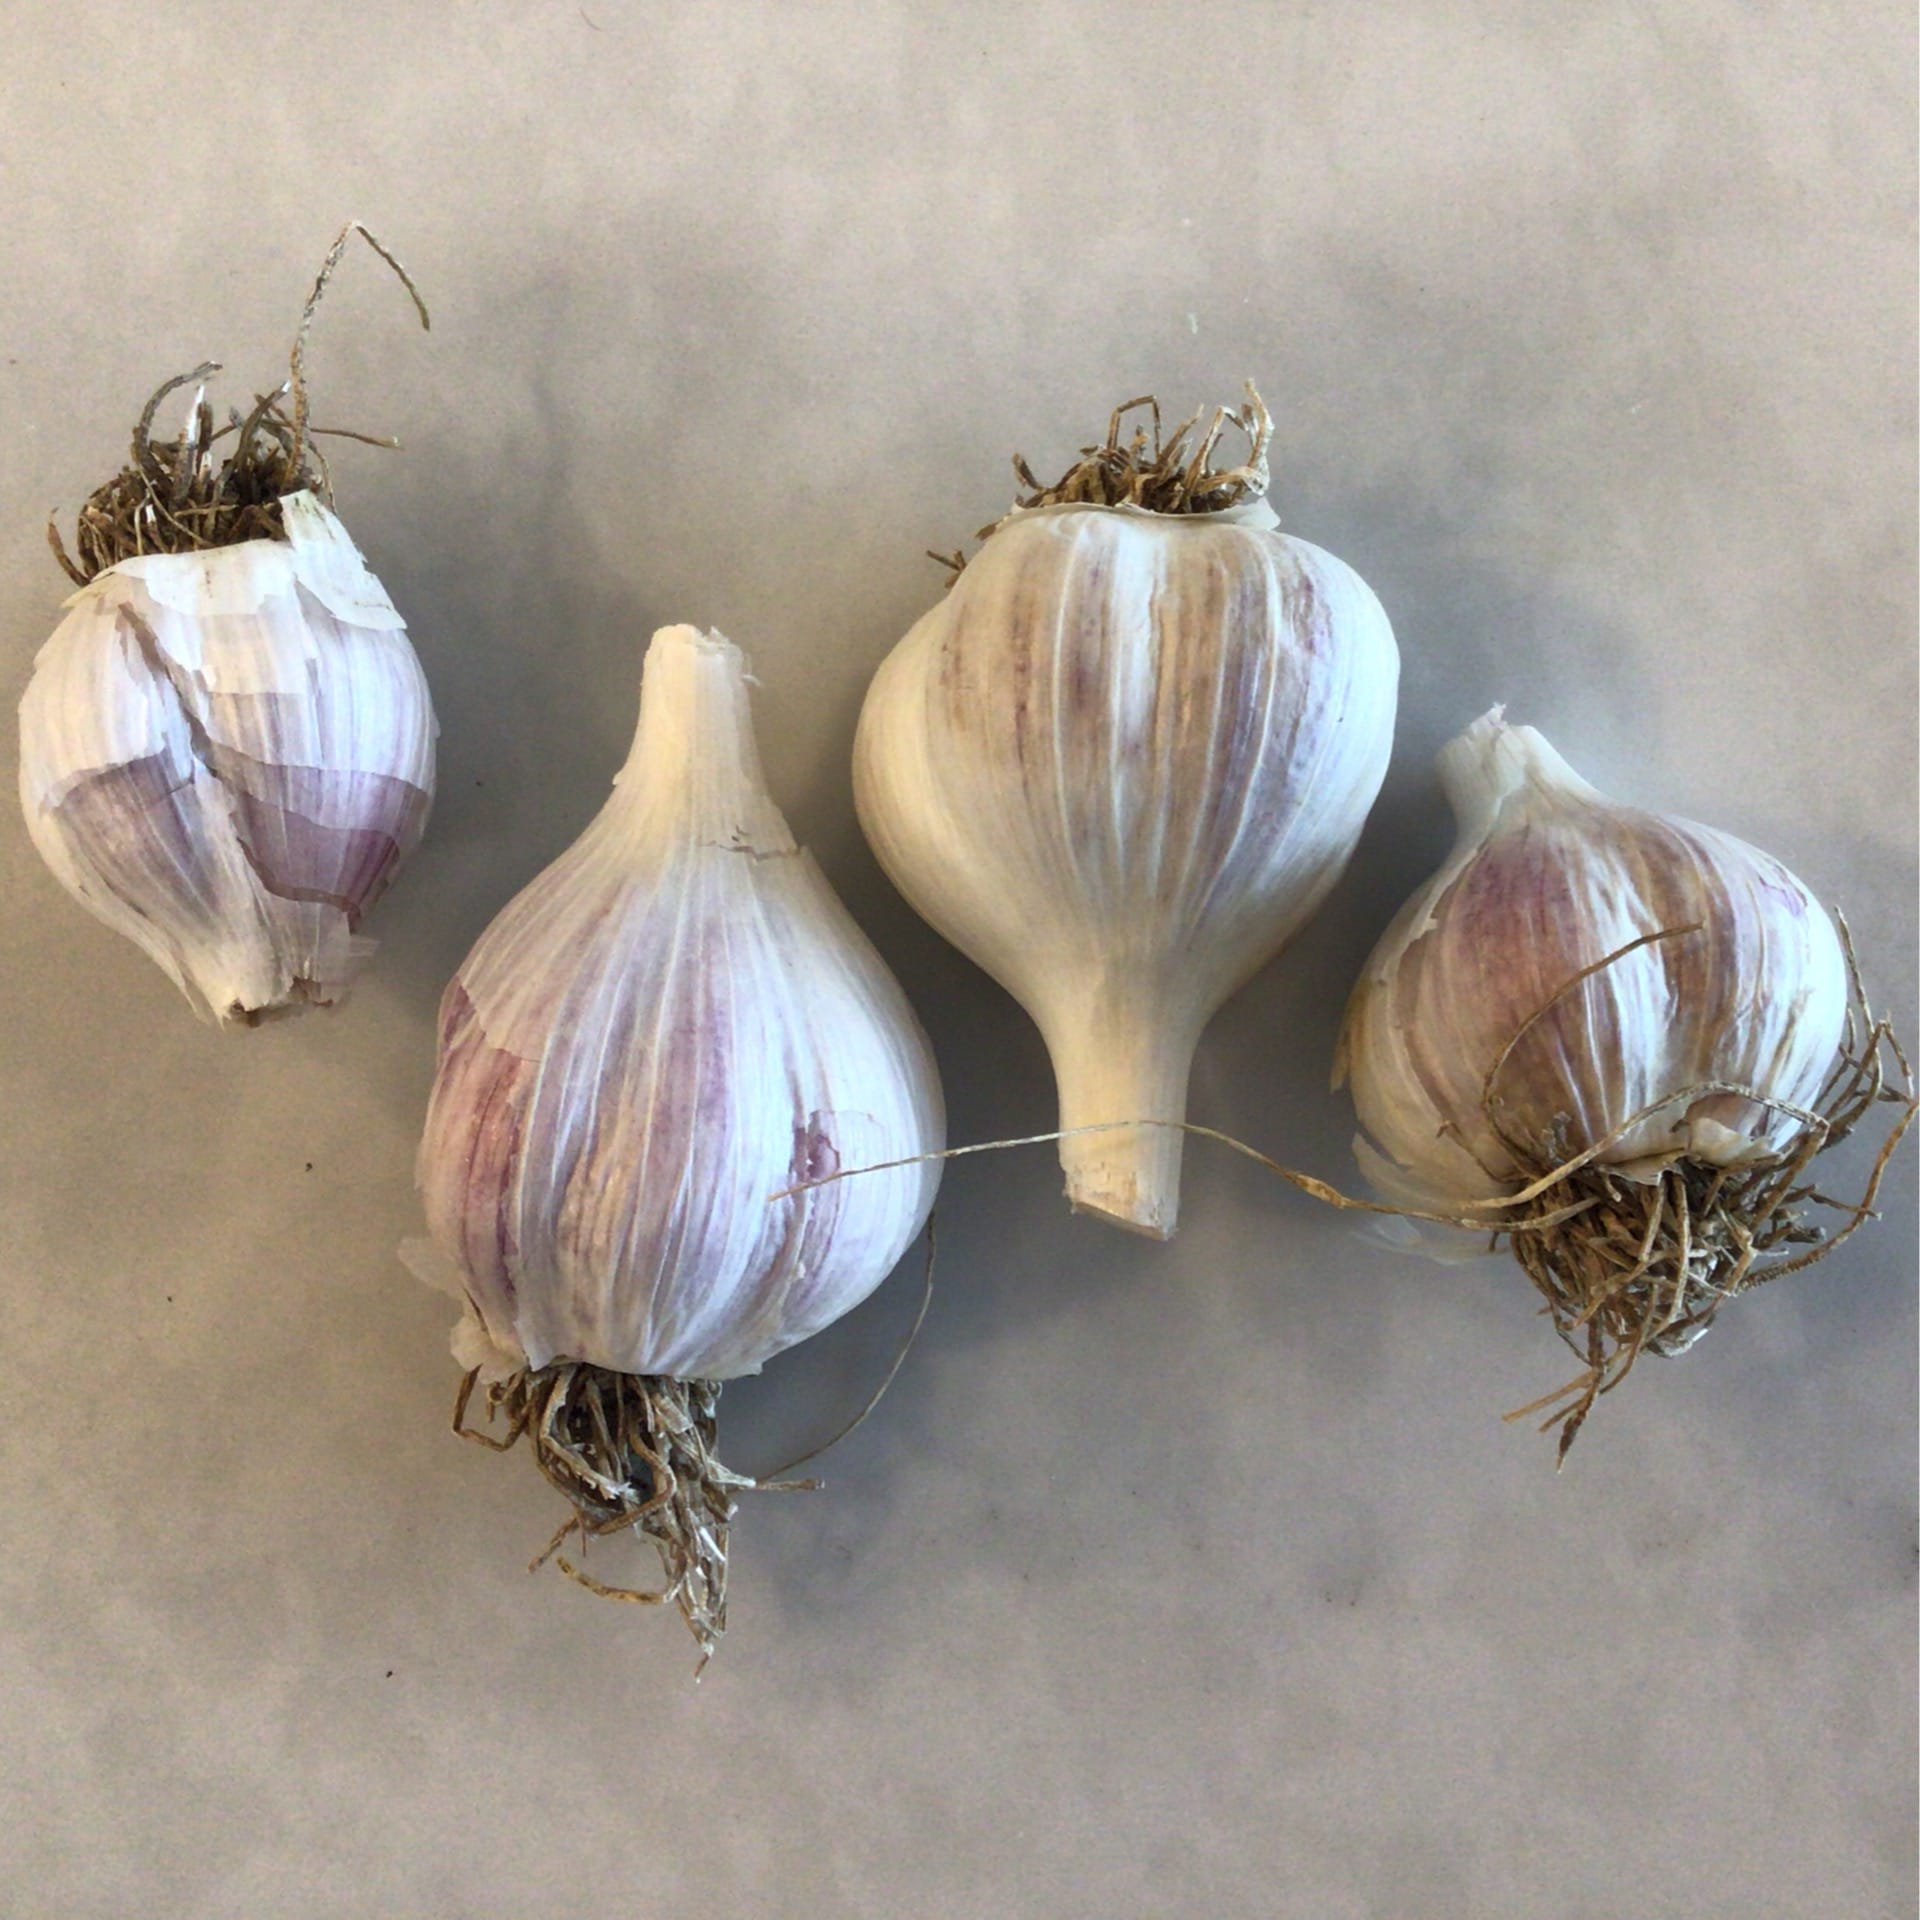 sold out garlic local german heirloom